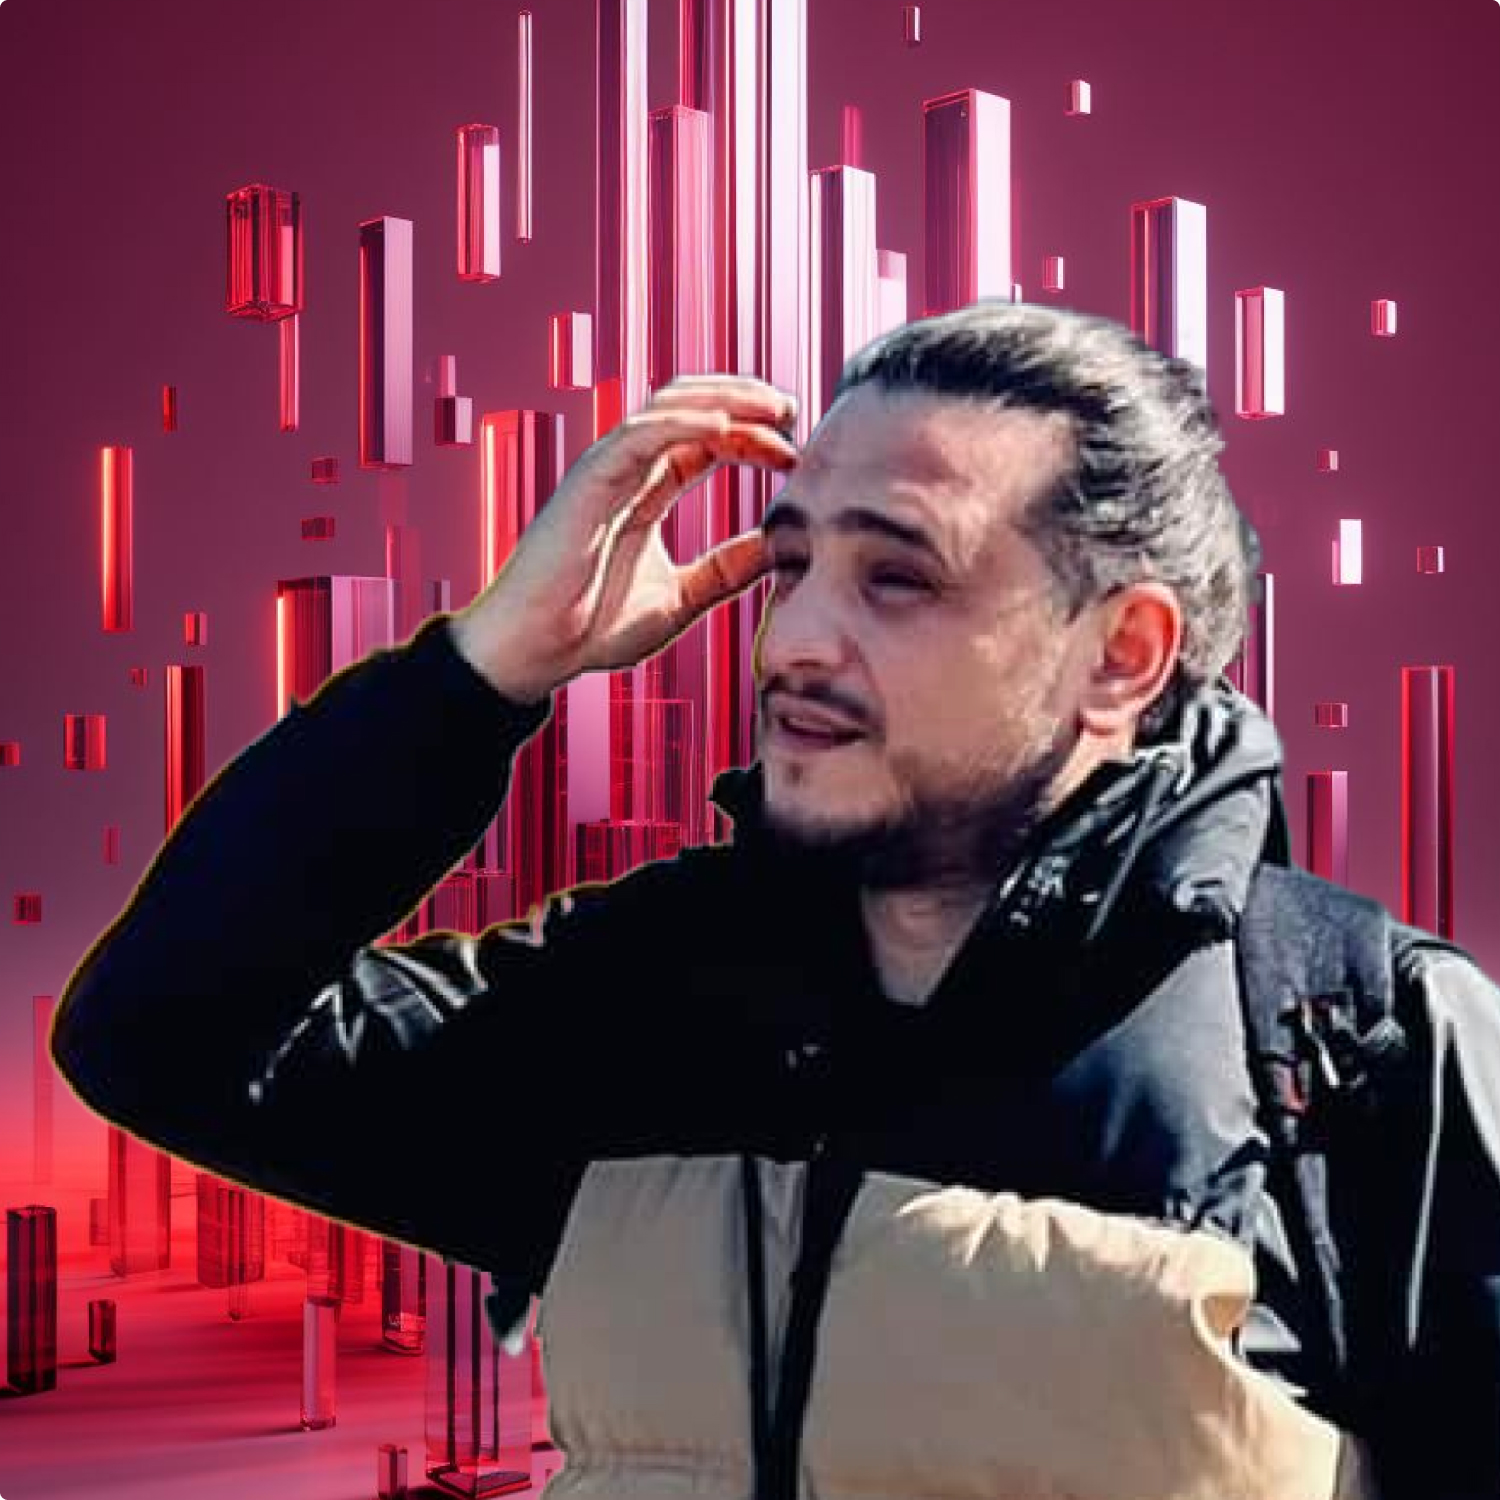 Man with a ponytail gazing into the distance against a futuristic pink and red cityscape background.